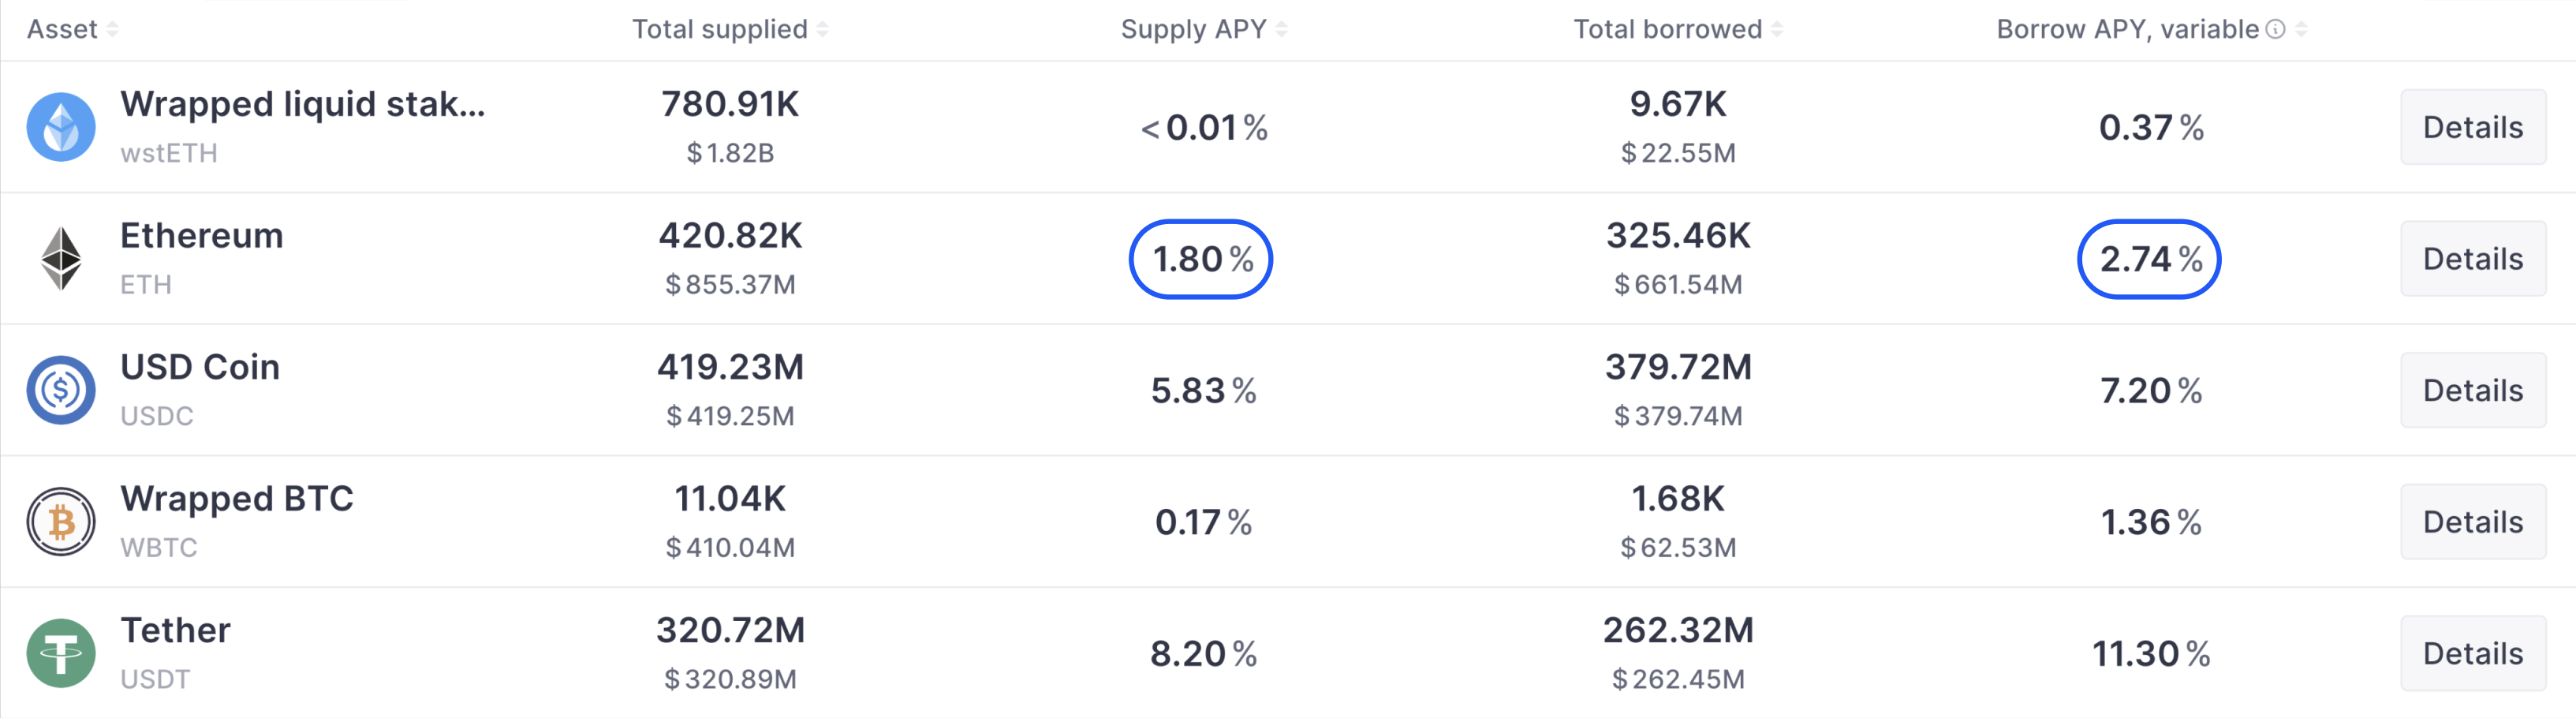 Rate Spreads on aave.com